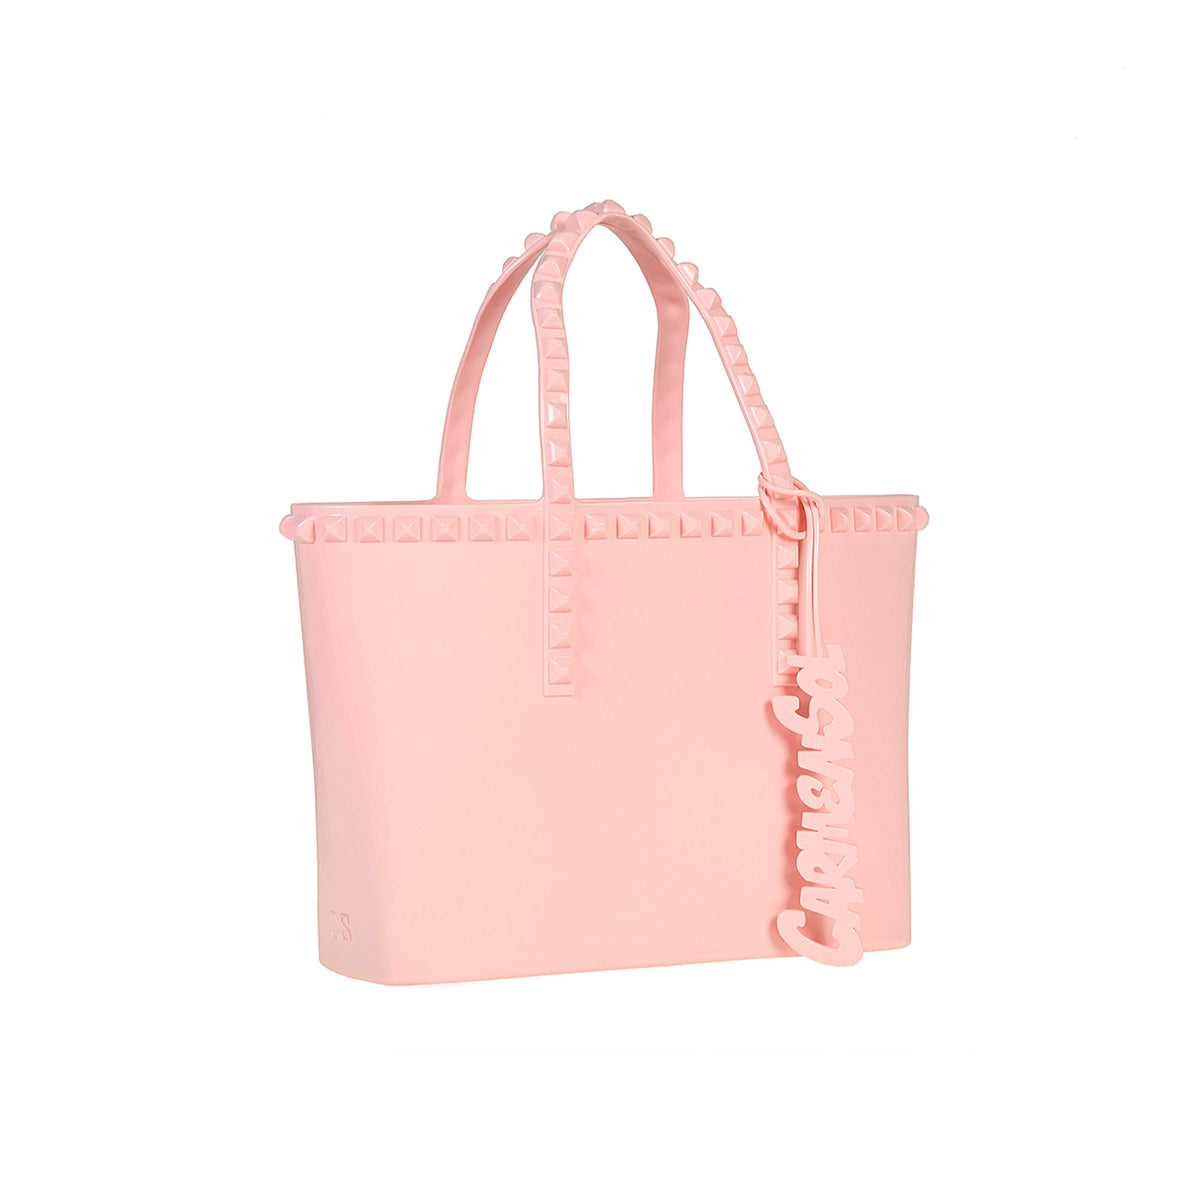 jelly studded bag from Carmen Sol perfect for the beach